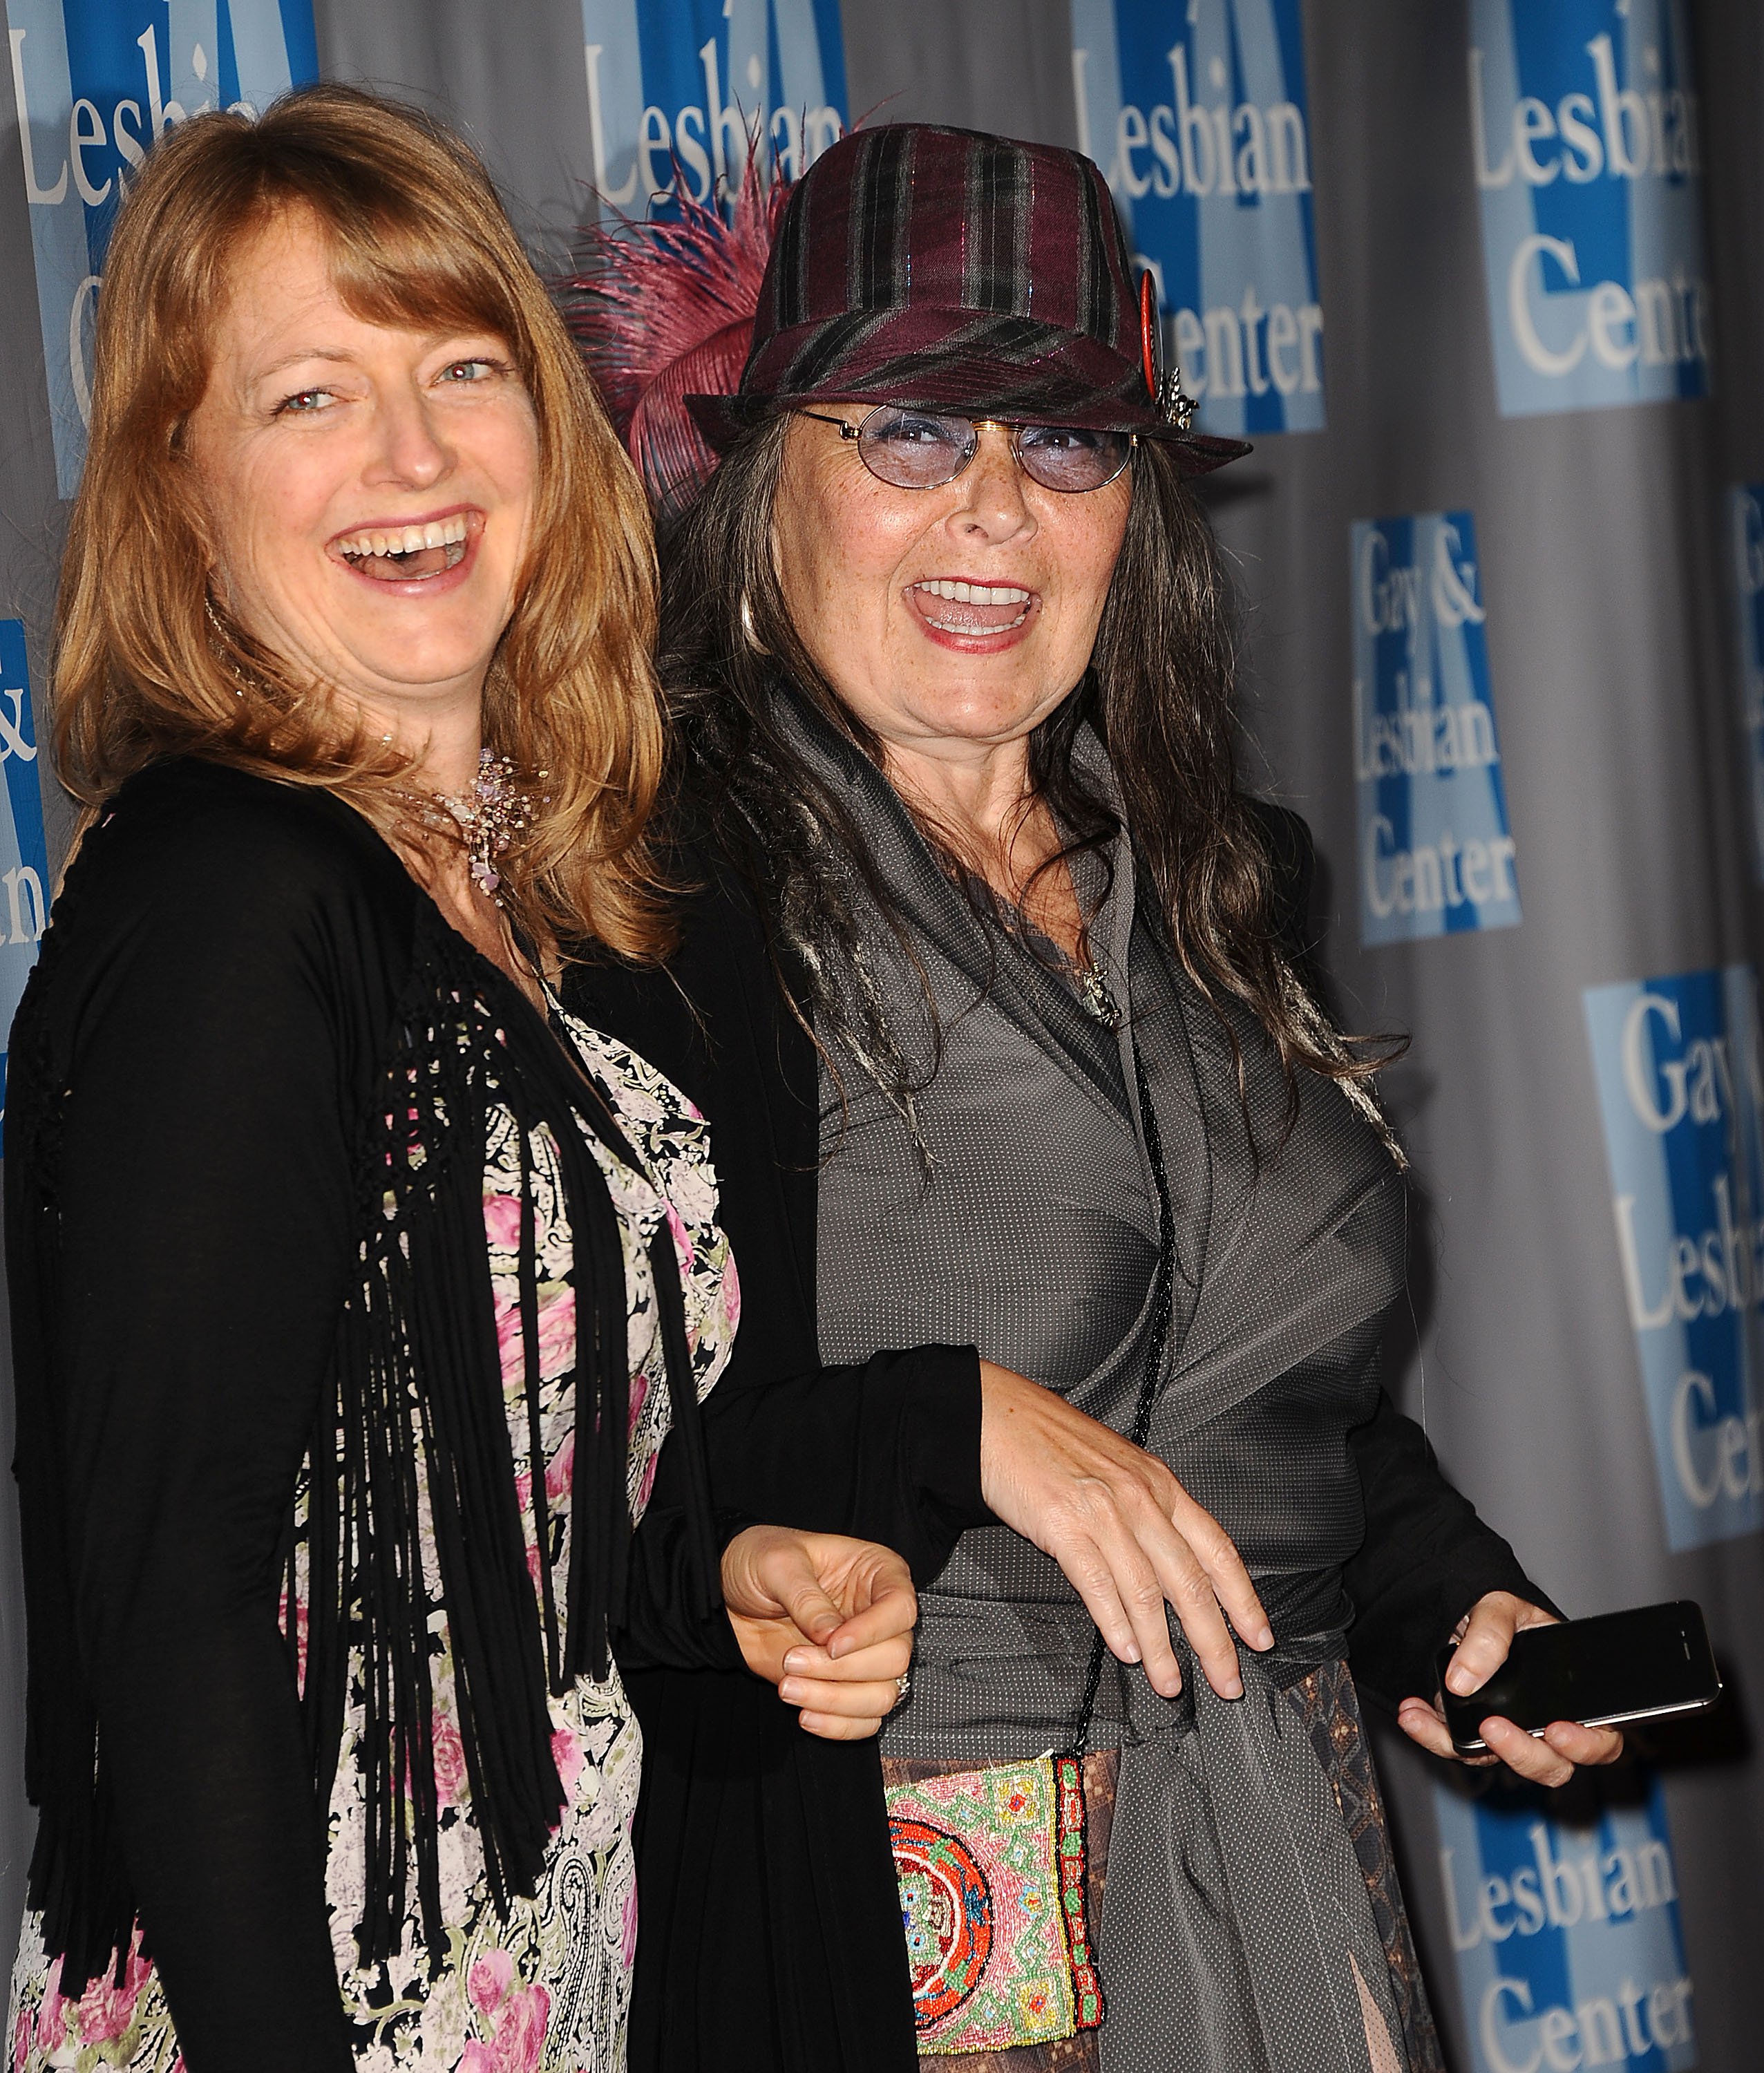 Brandi Brown and Roseanne Barr at the L.A. Gay & Lesbian Center's "An Evening With Women" on May 19, 2012, in Beverly Hills, California. | Source: Getty Images